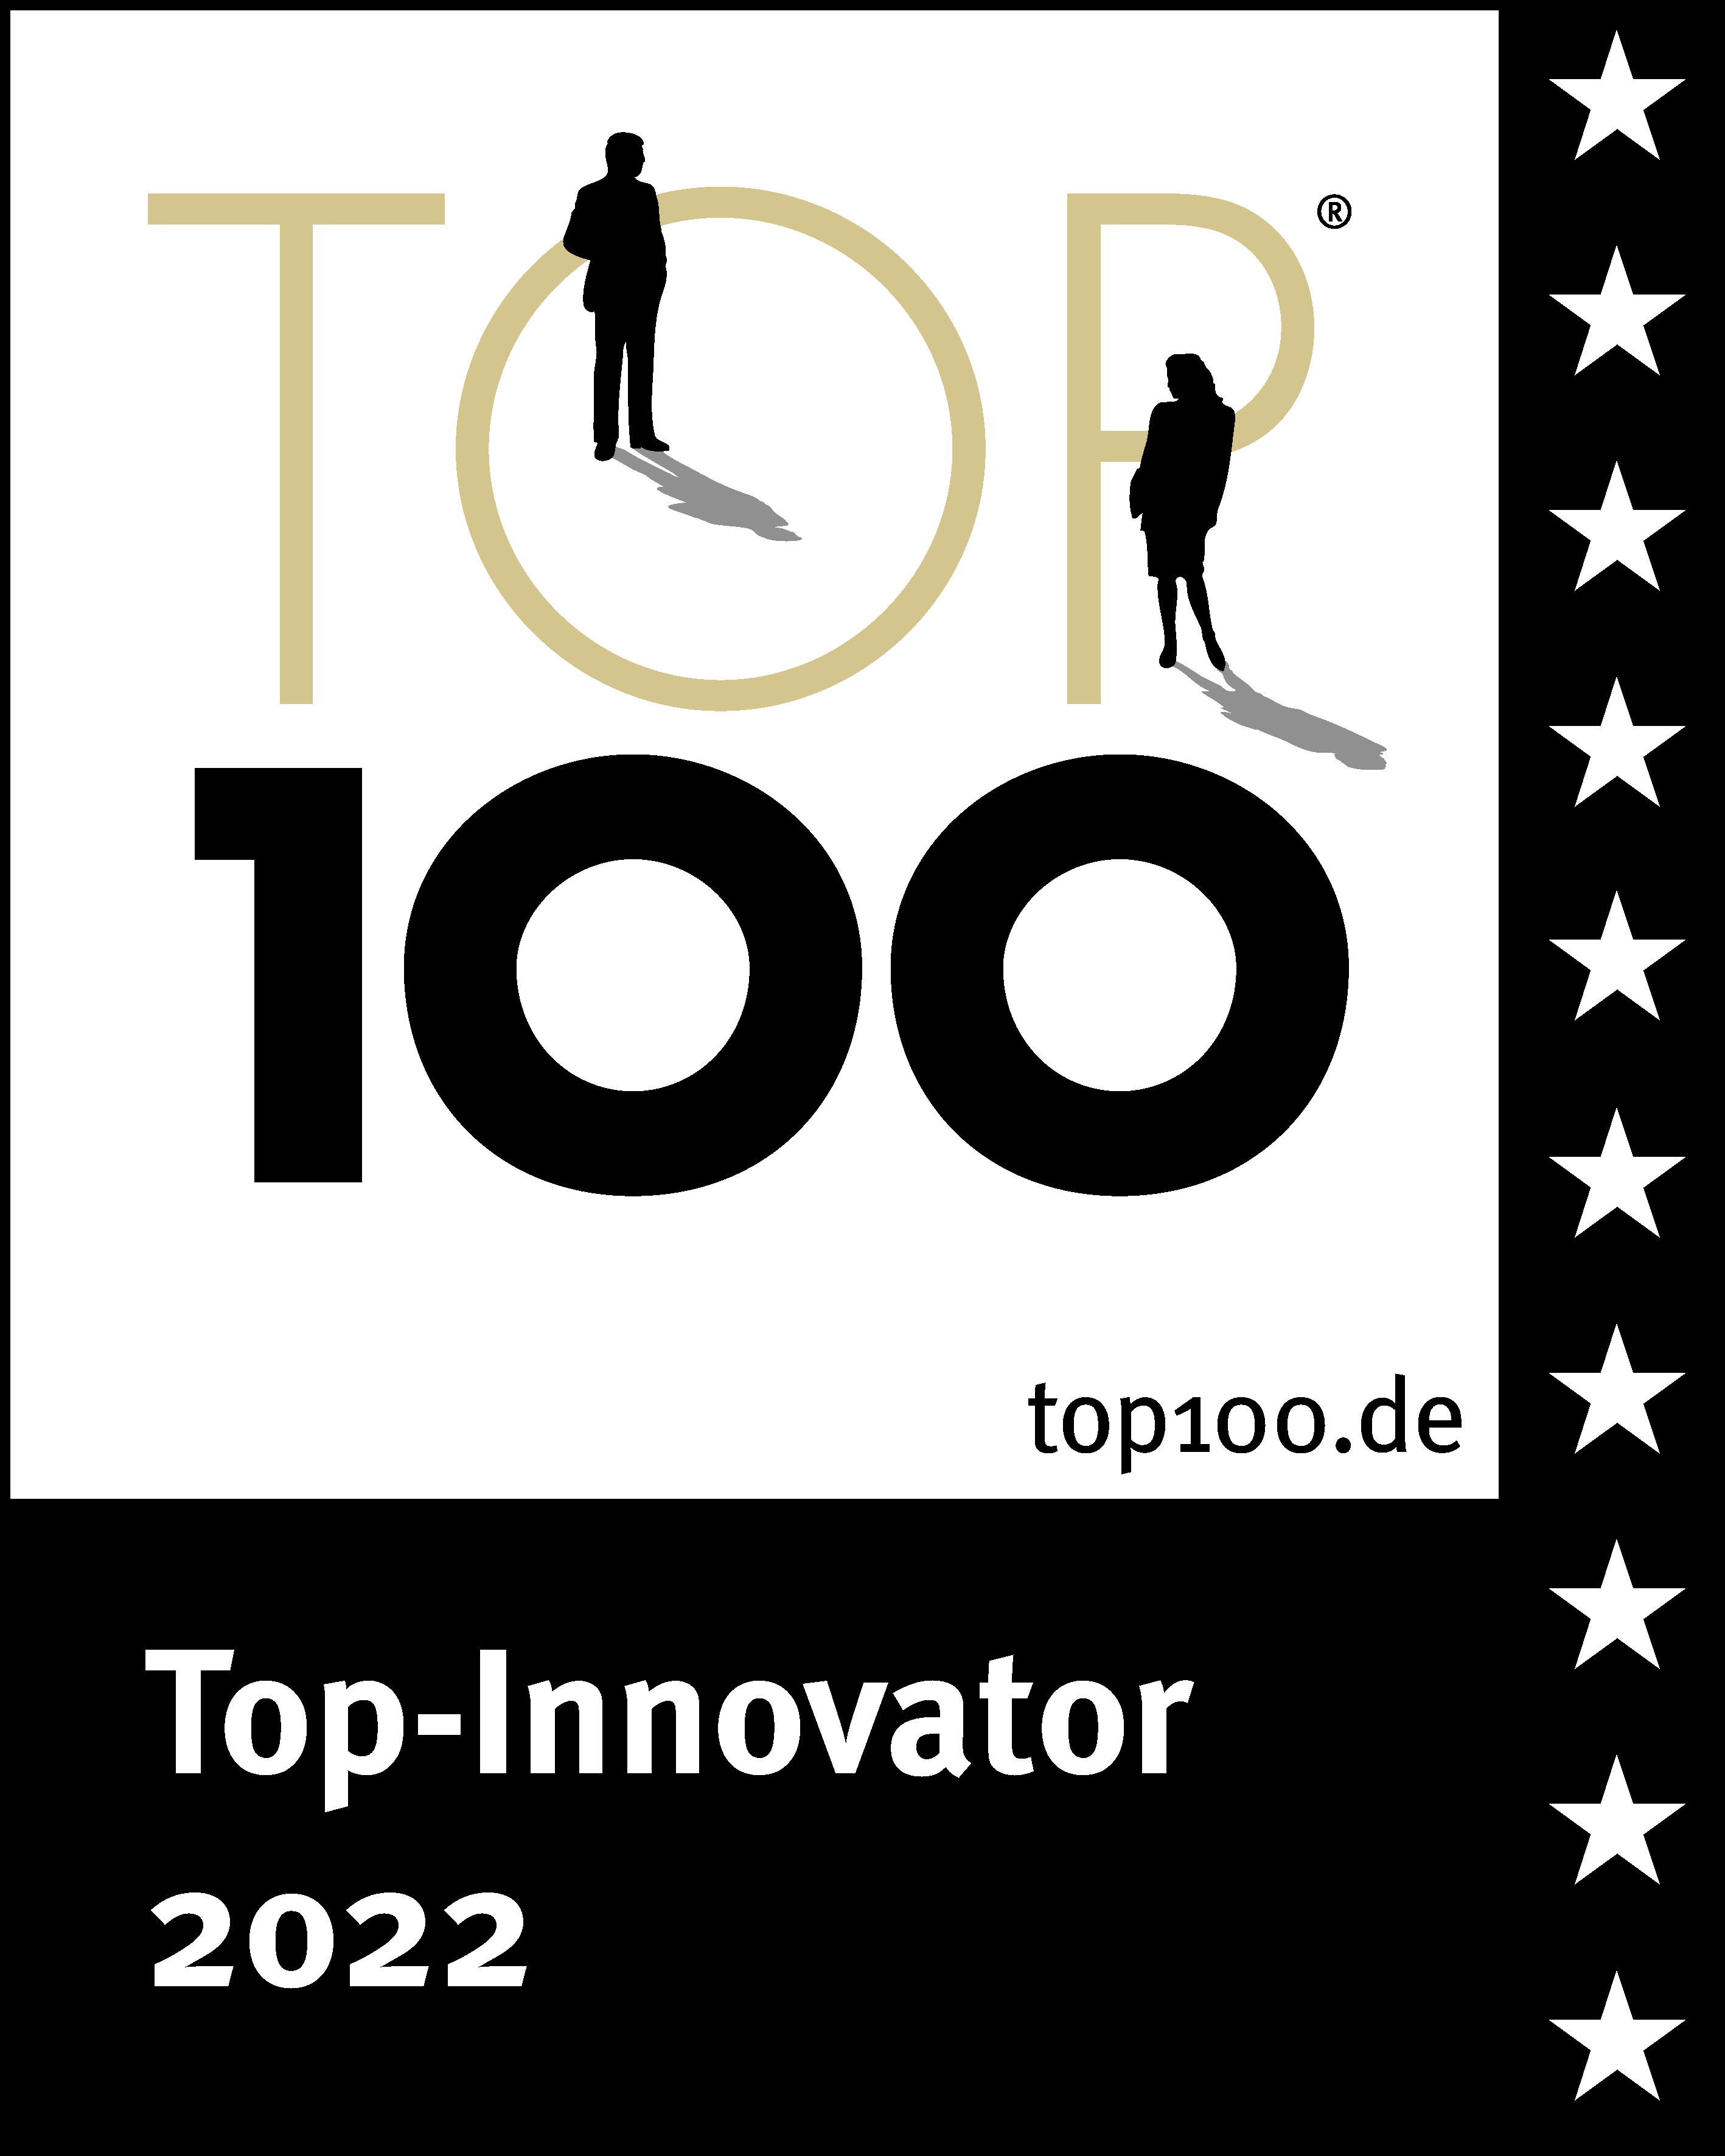 [Translate to Englisch:] Top-Innovator 2022